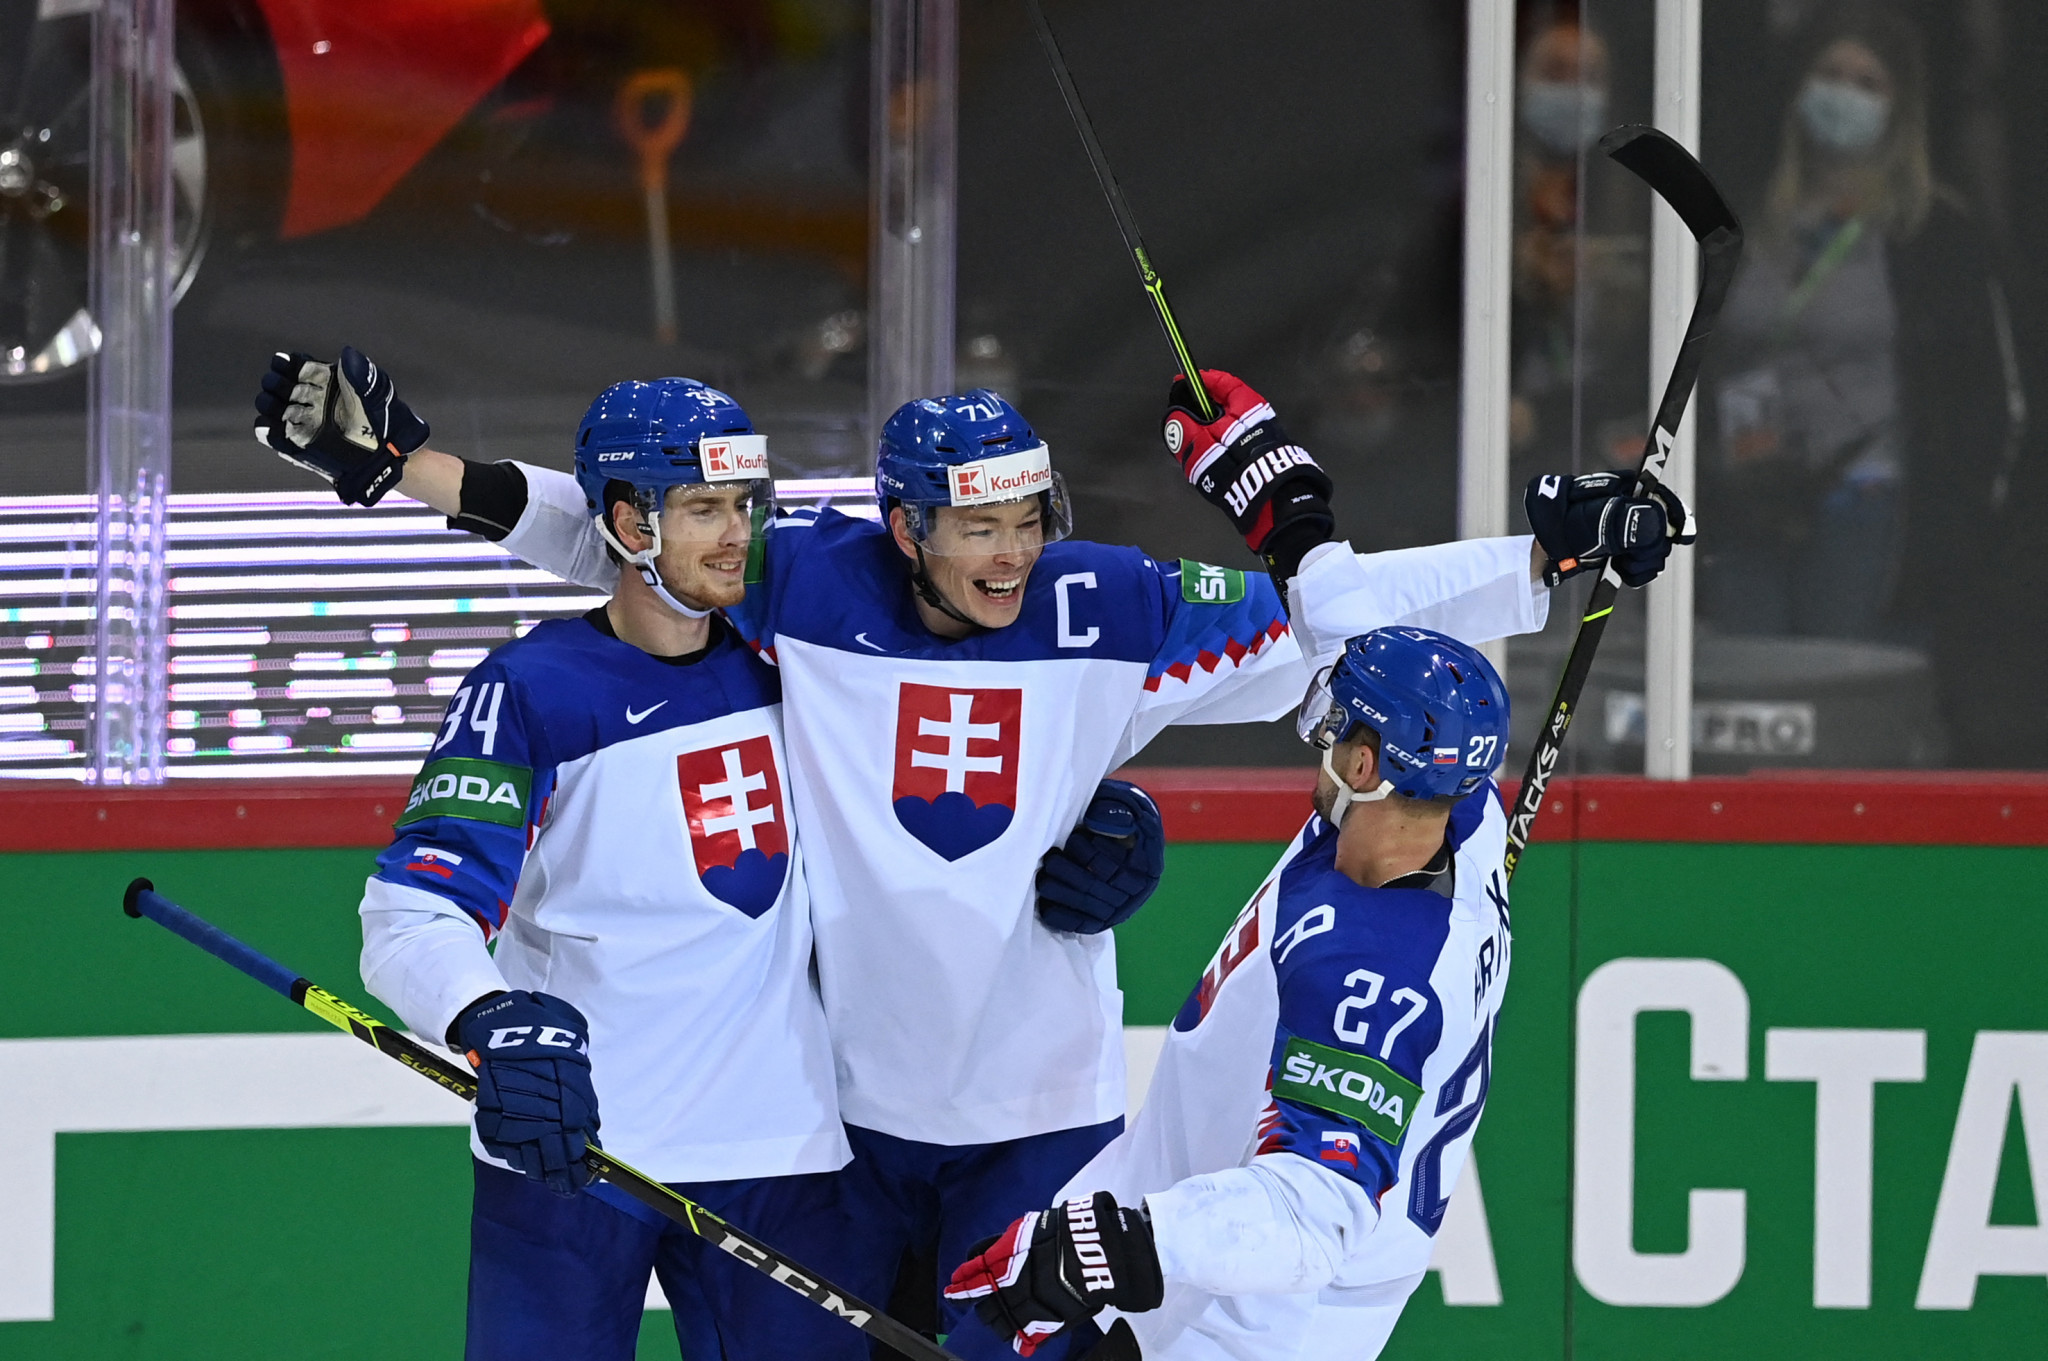 Slovak Ice Hockey Federation not calling up KHL players for World Championship